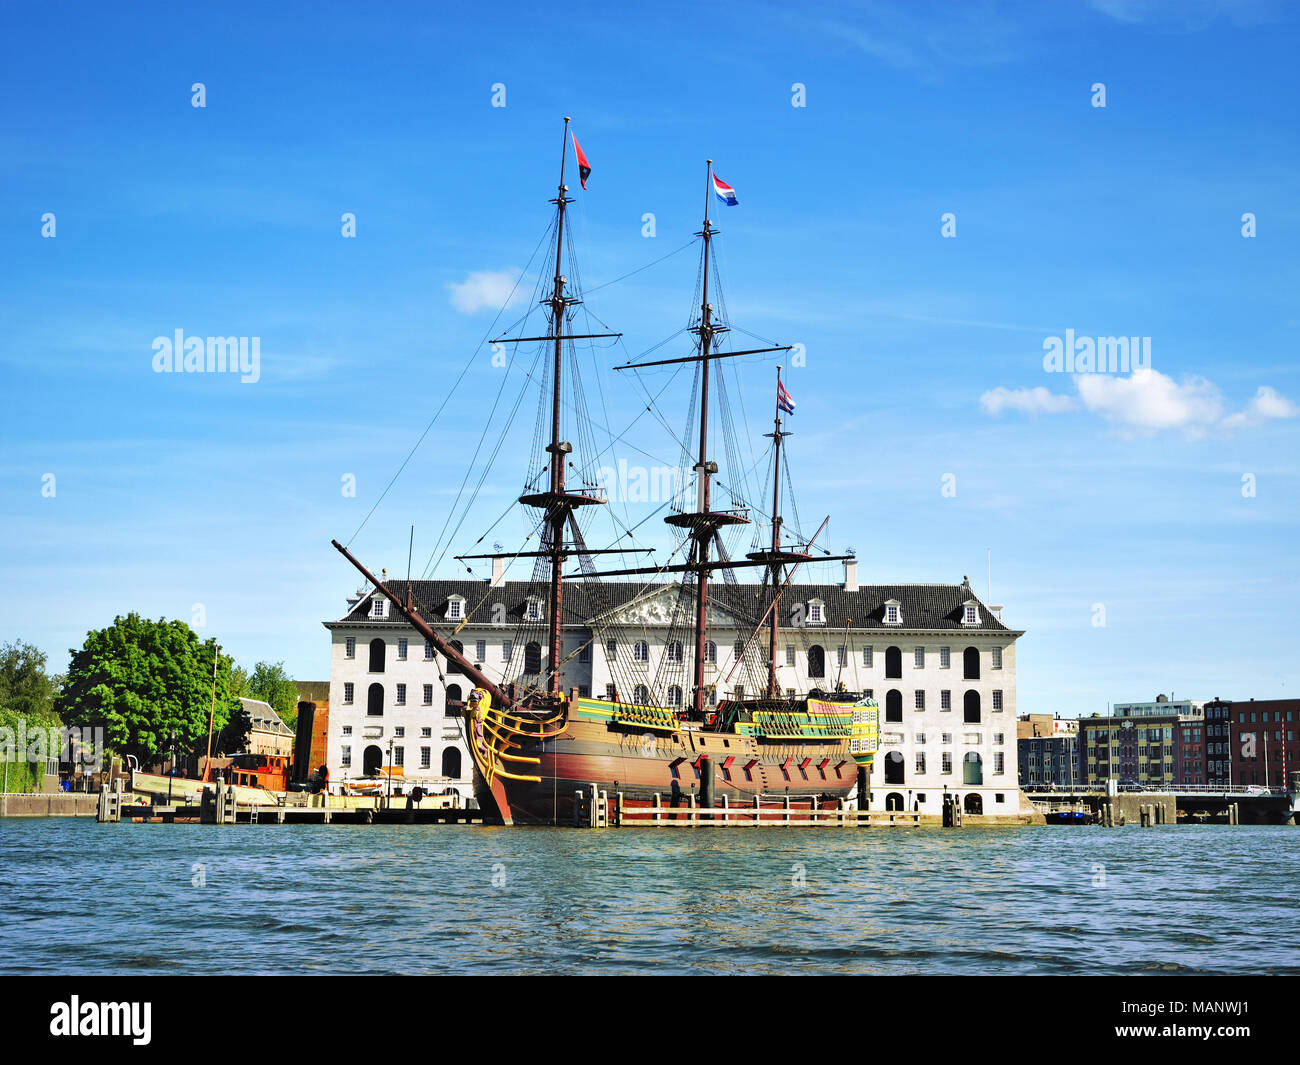 Pirate ship or wooden ship in front of an historical building in Amsterdam. Sightseeing attraction, antique ship. Stock Photo